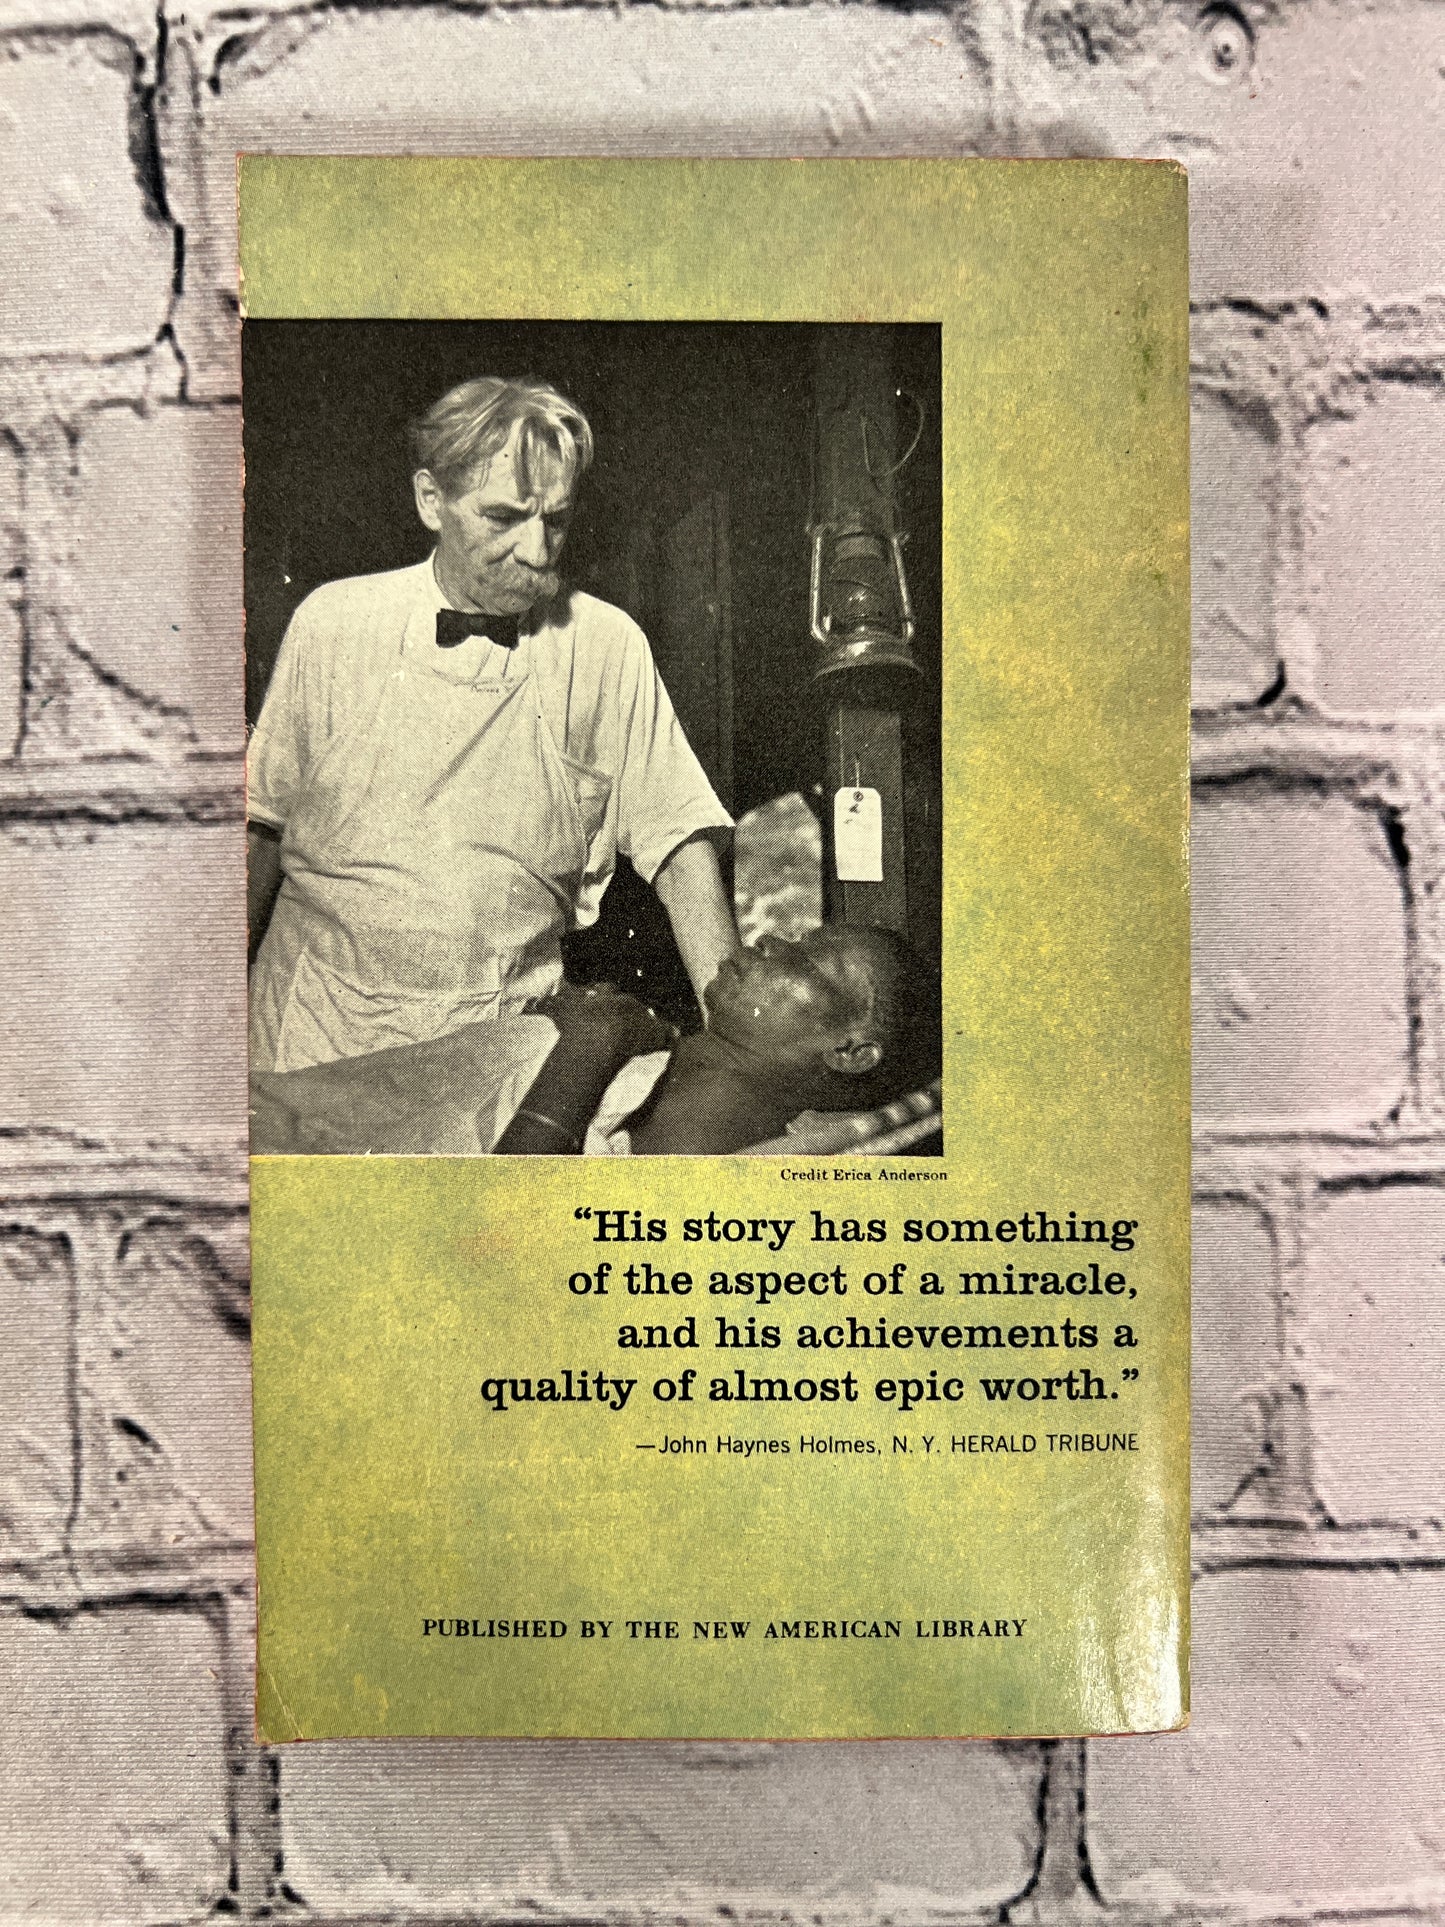 Out of My Life and Thought by Albert Schweitzer [1961]